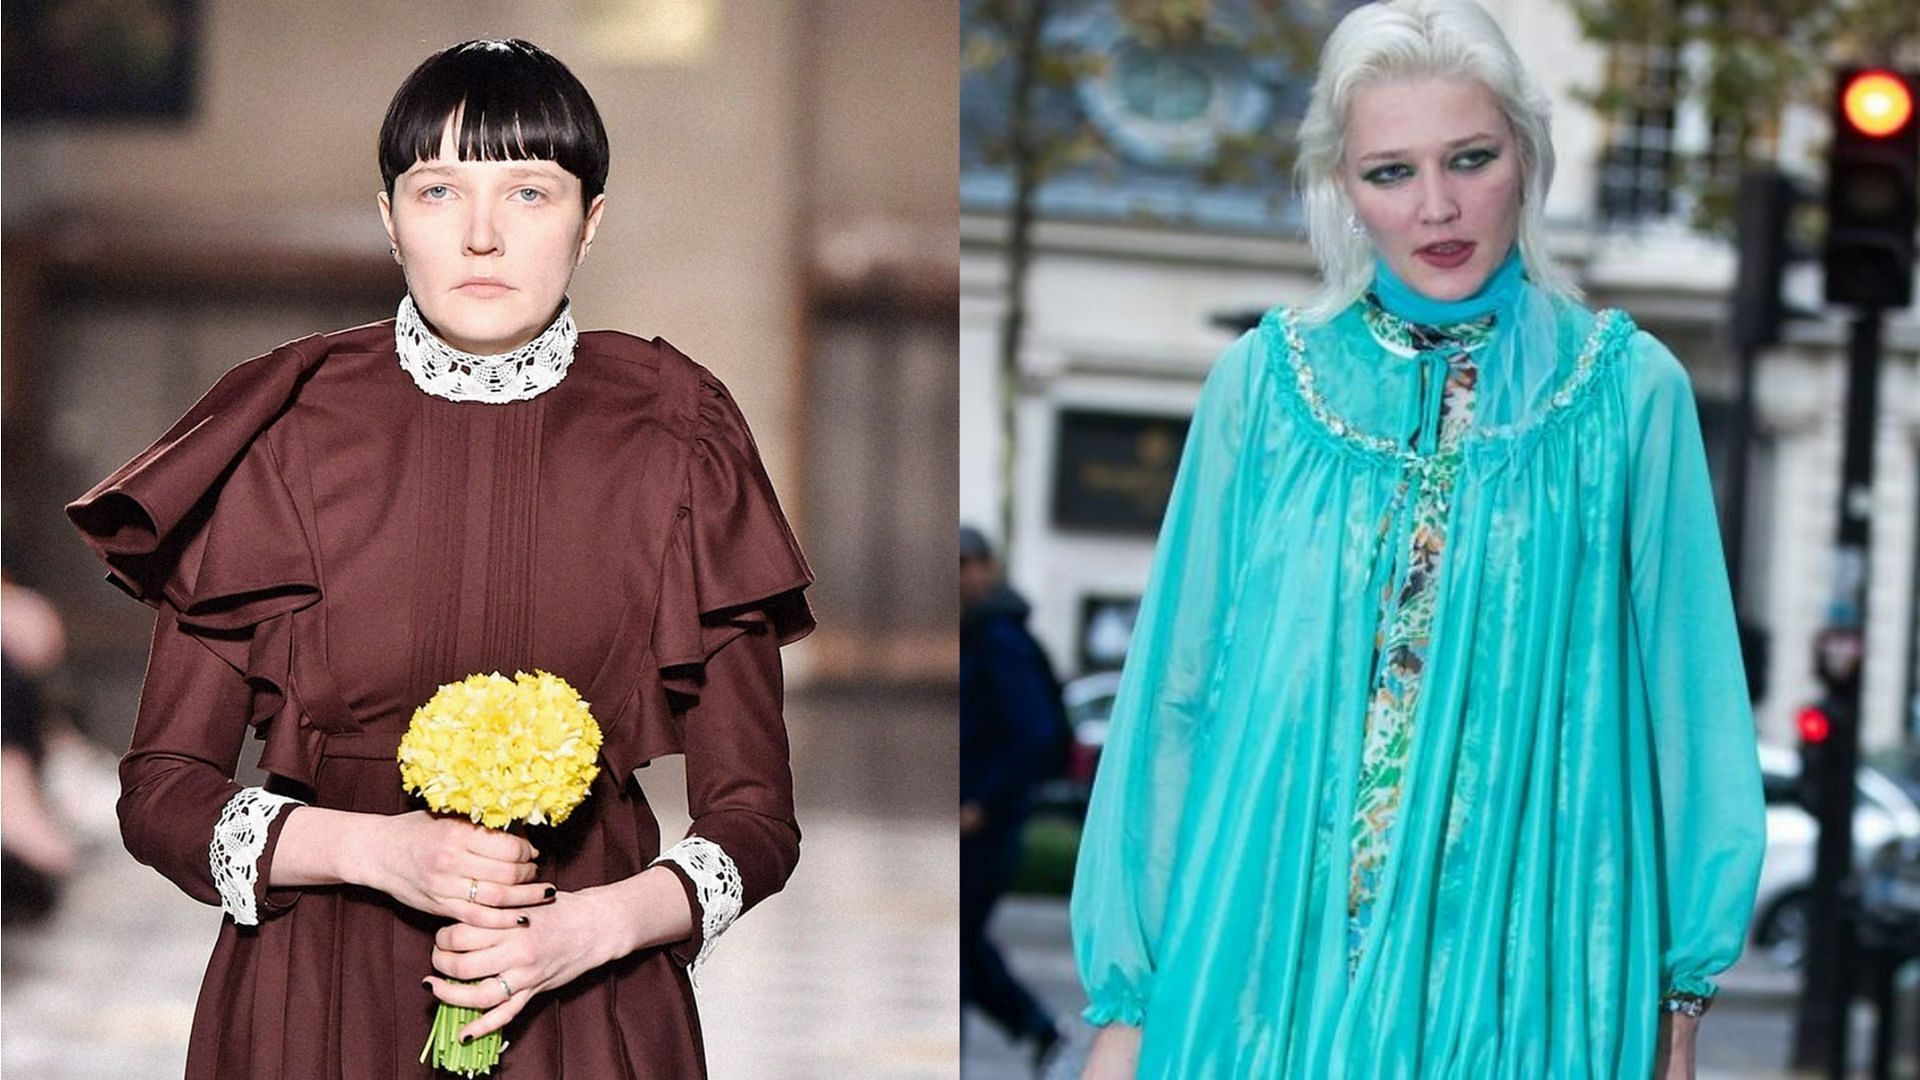 From post-soviet style to Kanye West: the rise of Lotta Volkova